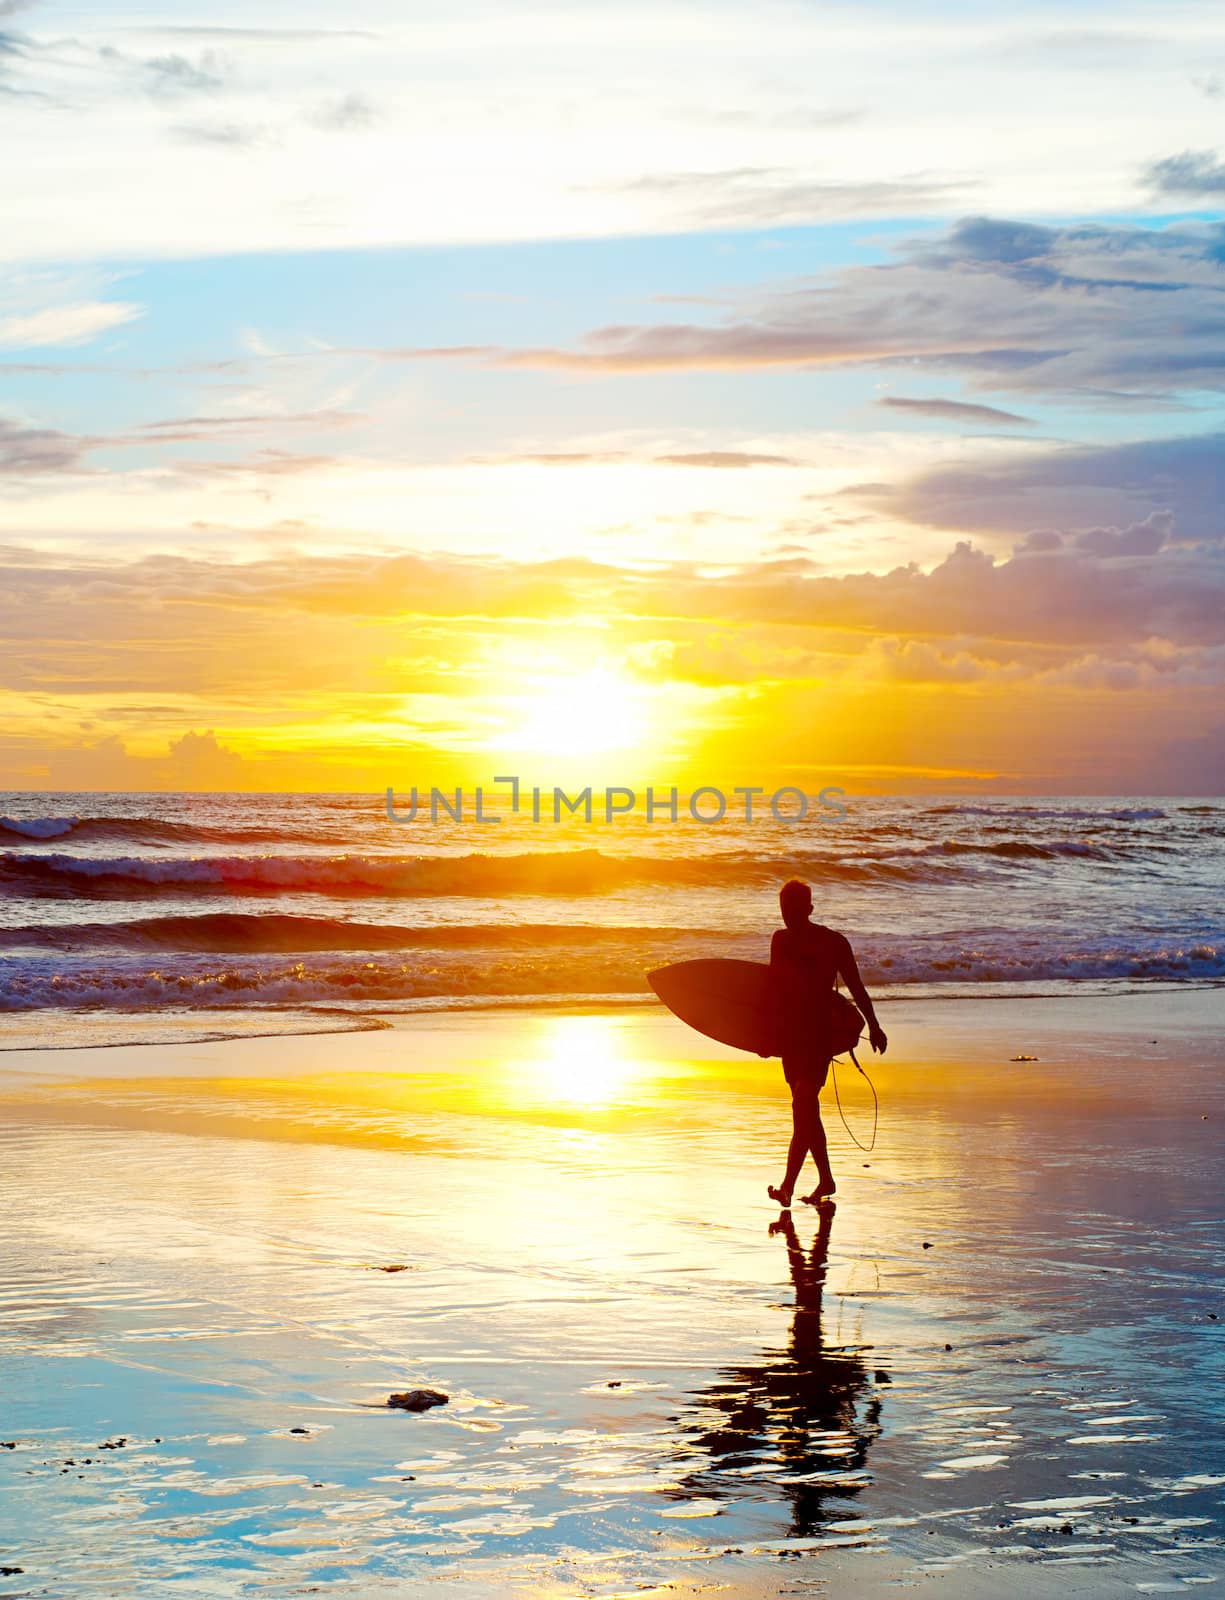 Surfer on the ocean beach at sunset on Bali island, Indonesia